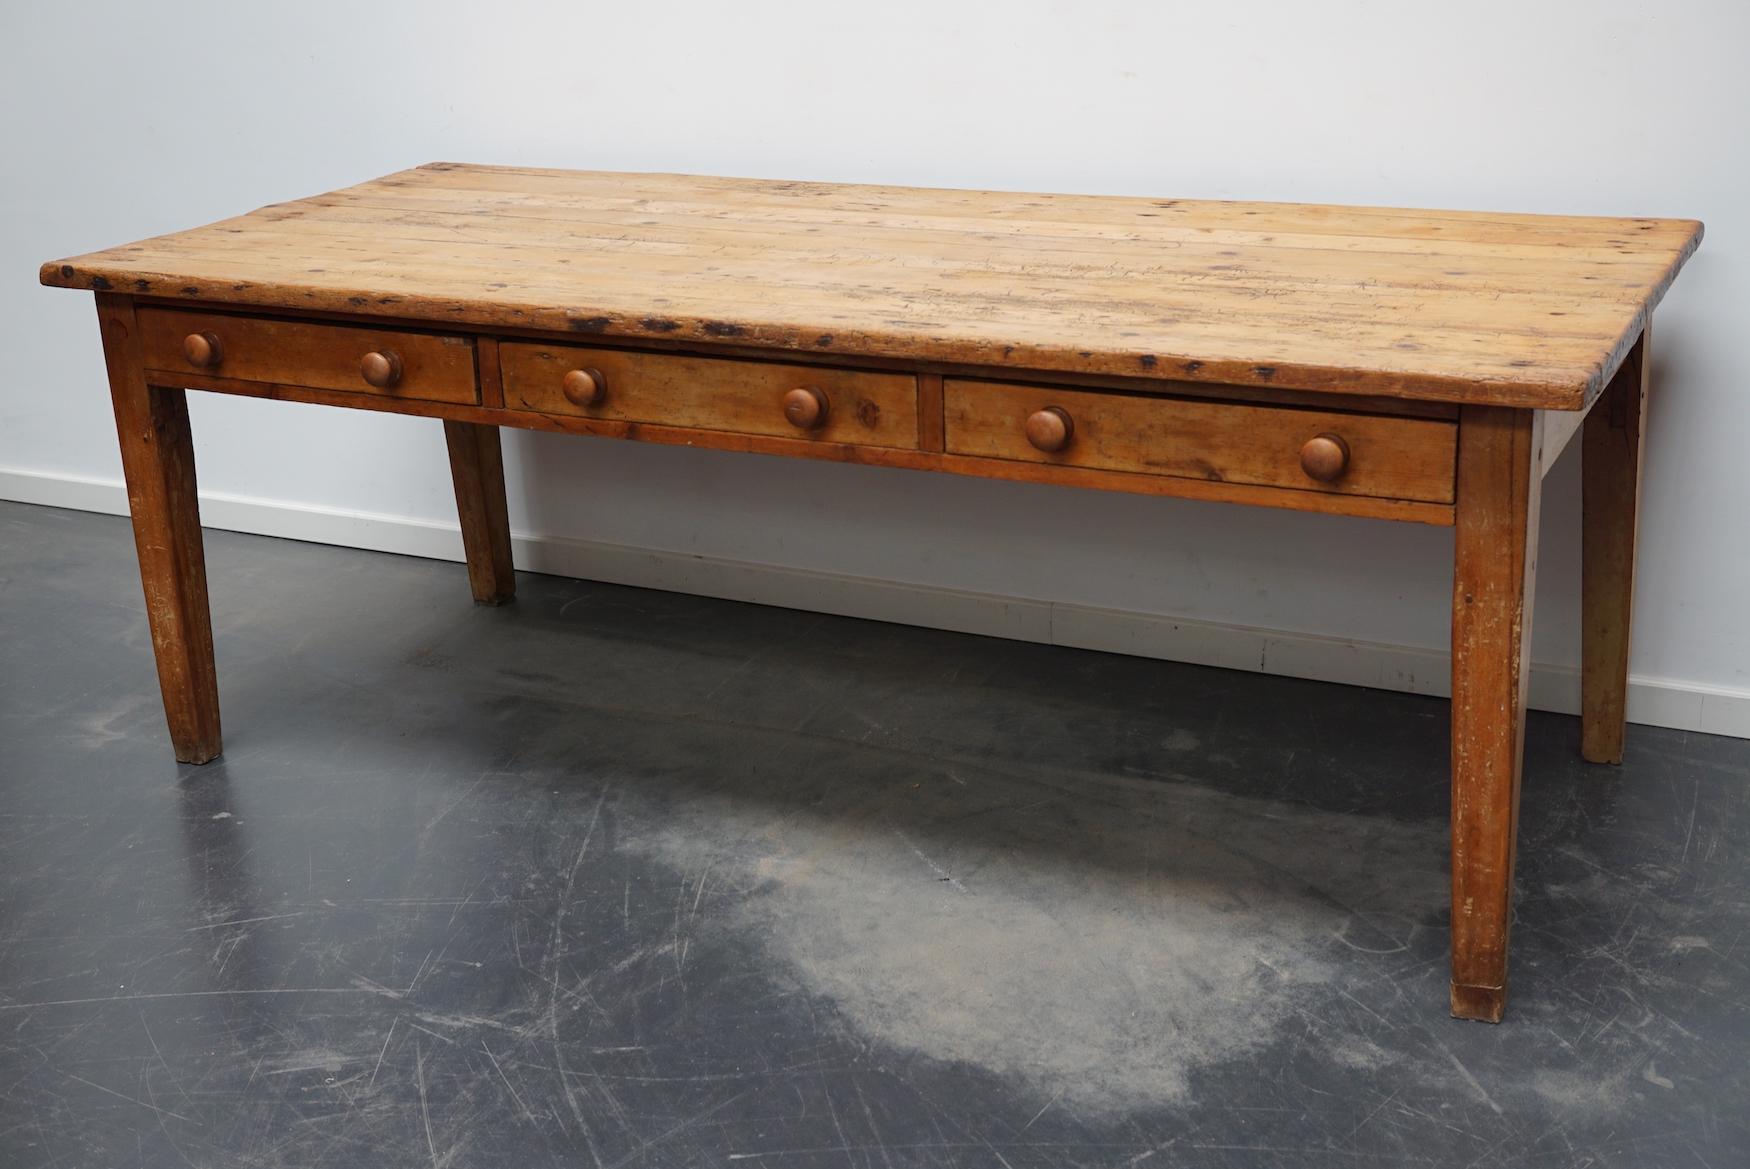 This English farmhouse table was made at the end of the 19th century. It retained a very nice rich patina over the years. The leg room / knee height is 59 cm.